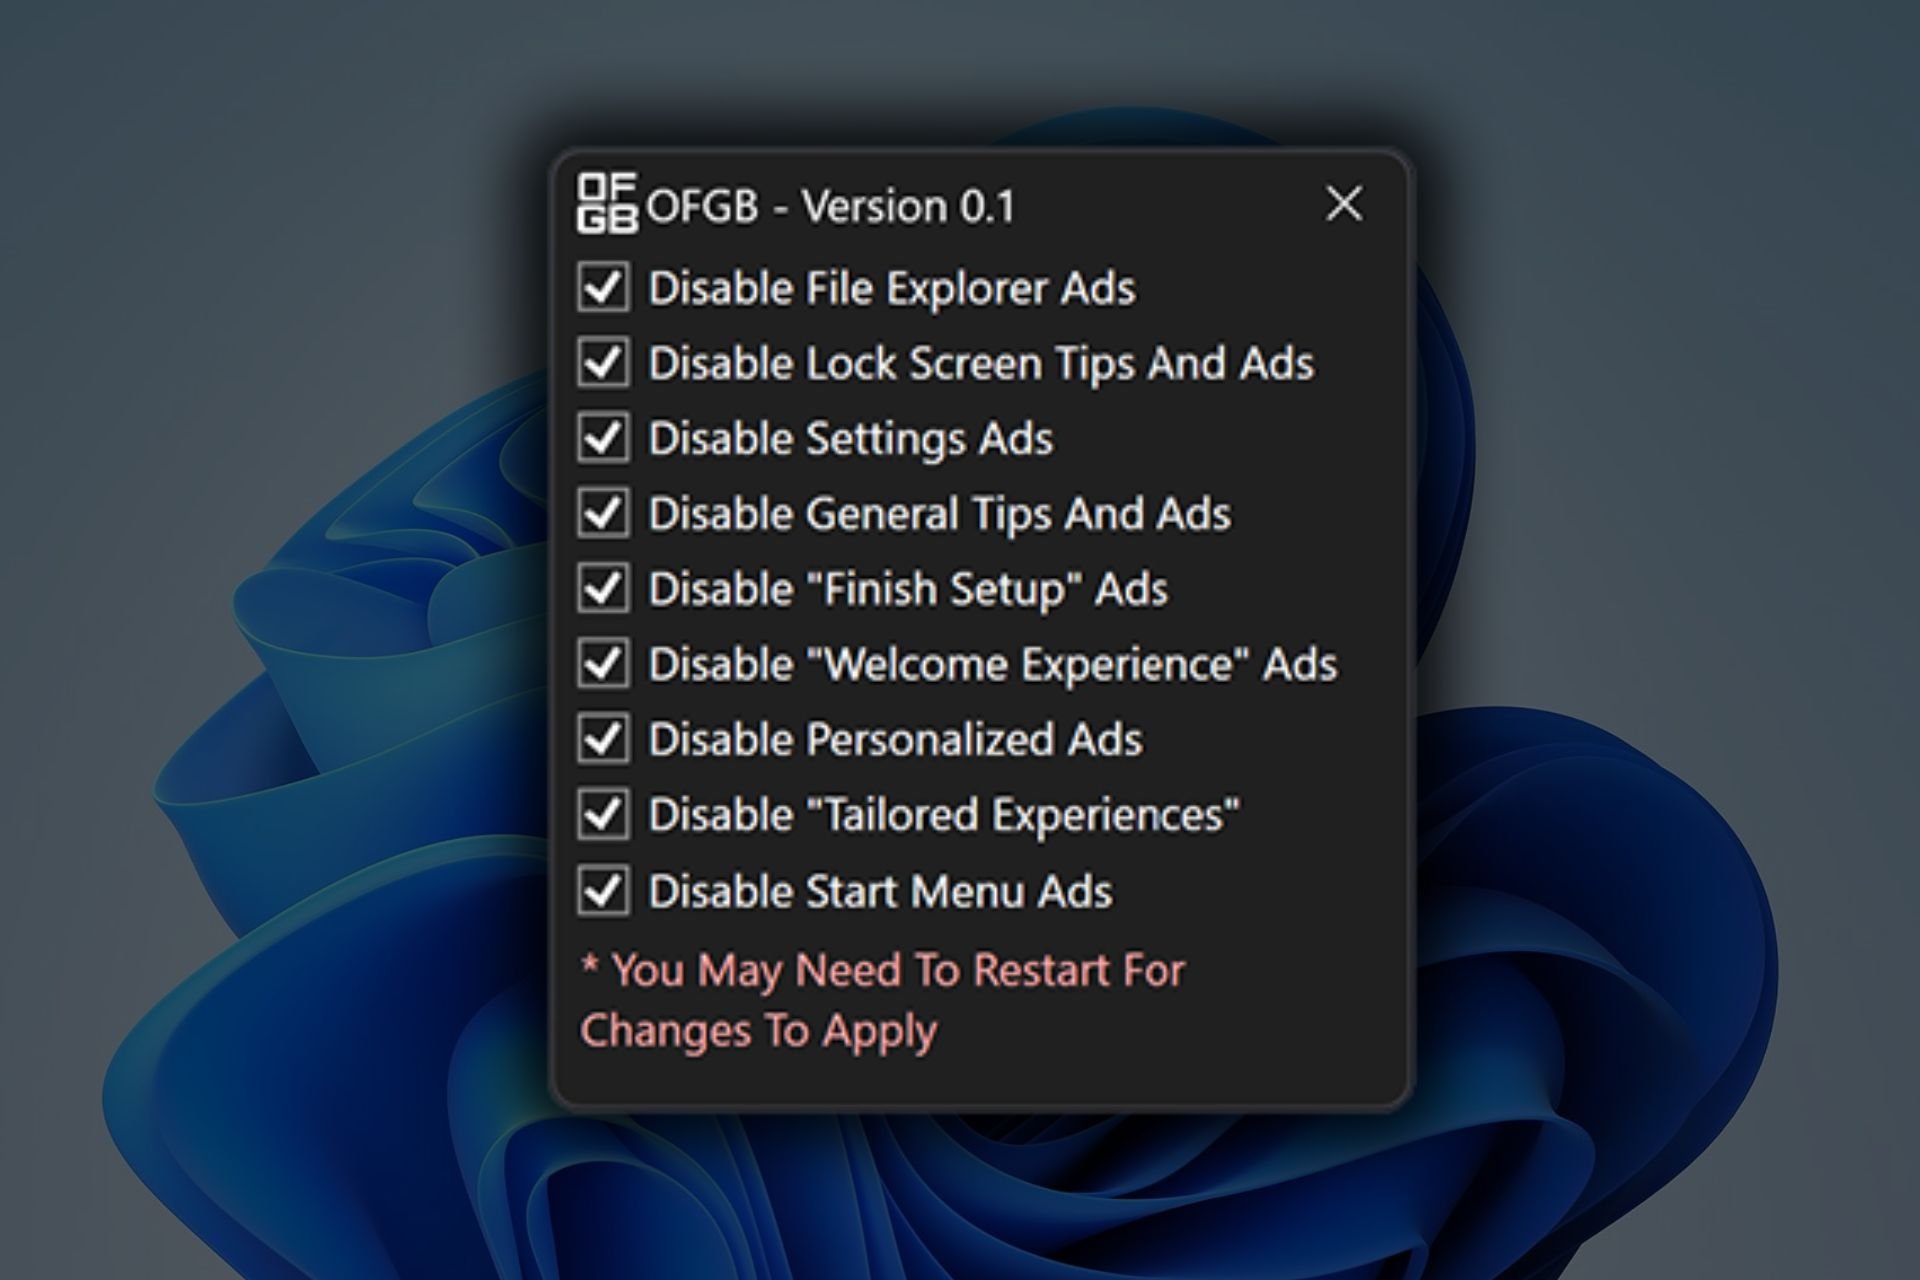 A new unofficial tool 'Oh Freak Go Back' lets you remove Windows 11's ads